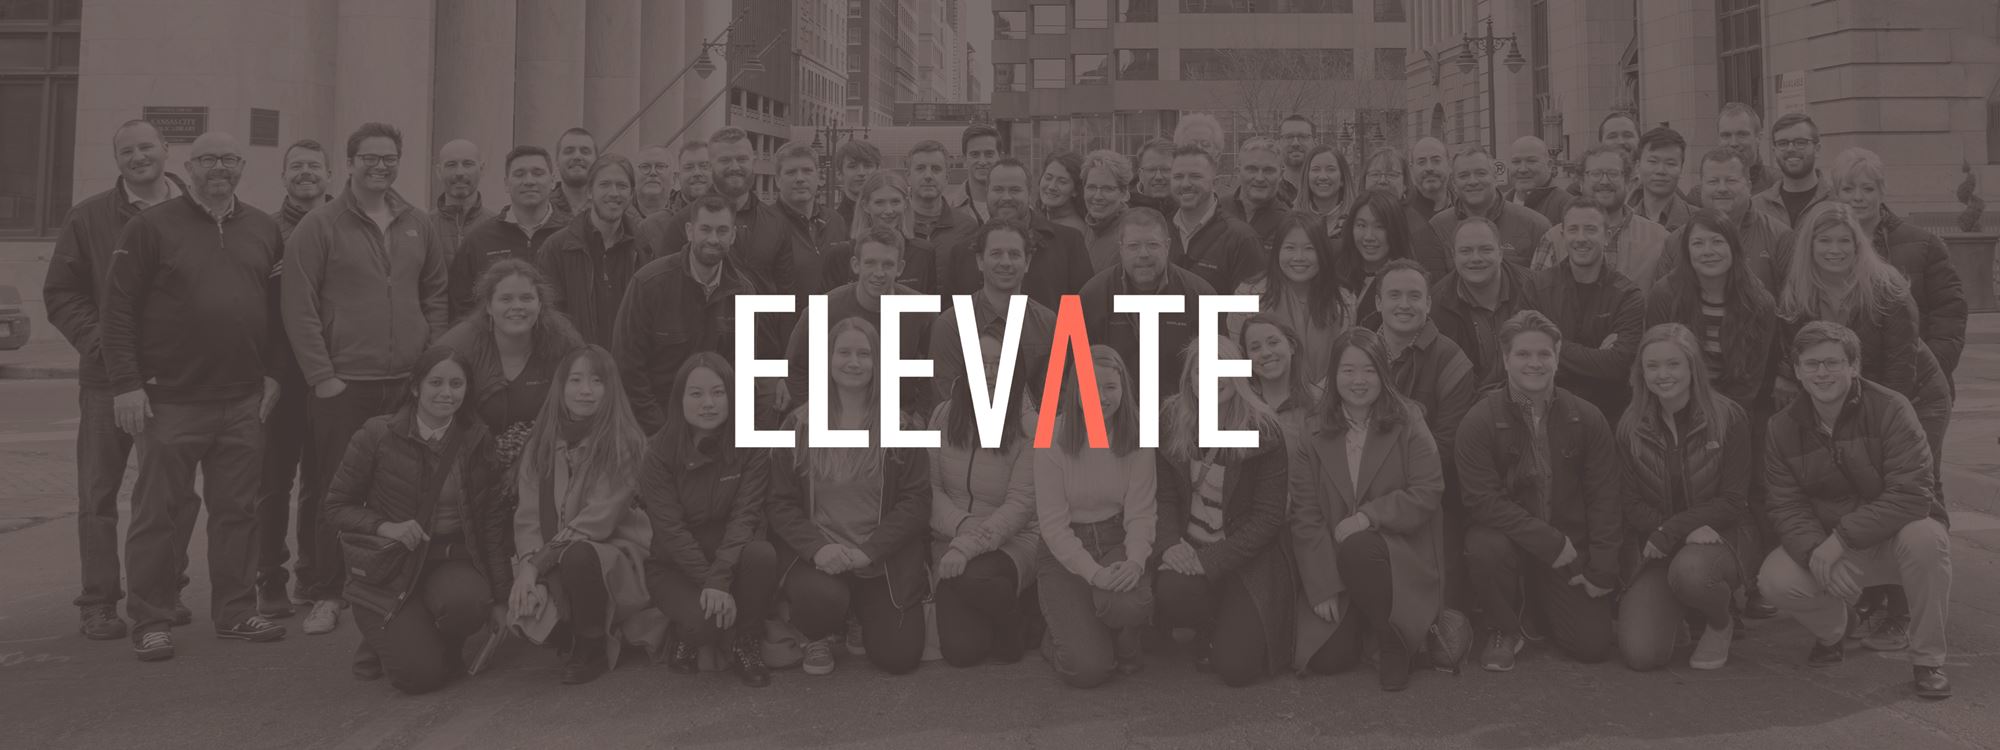 All Staff ELEVATE 2.png